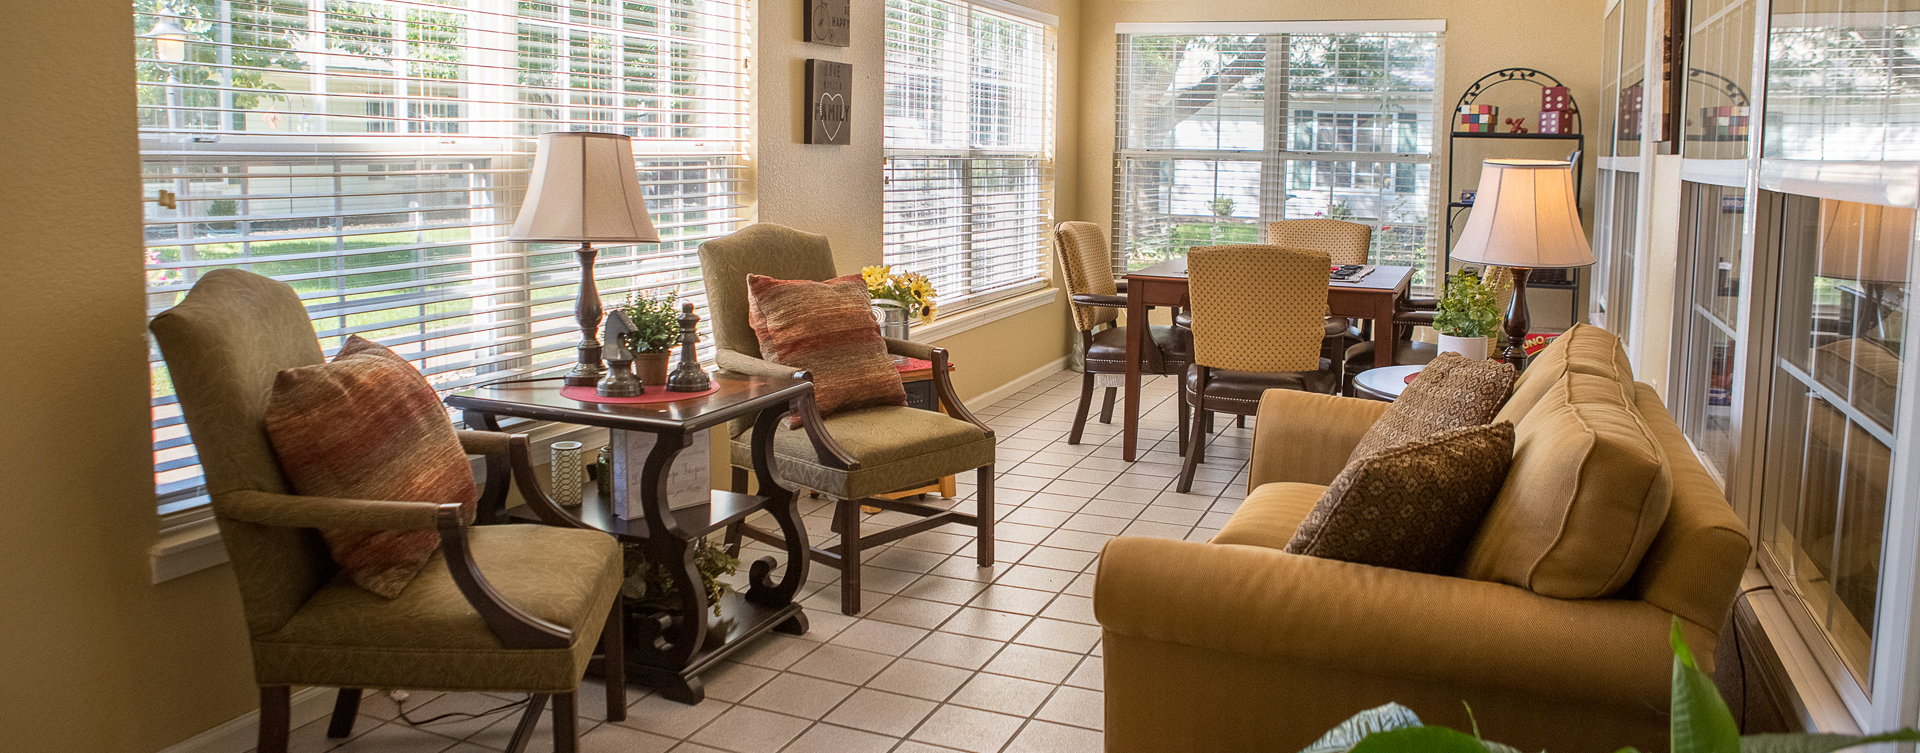 Enjoy the view of the outdoors from the sunroom at Bickford of Muscatine